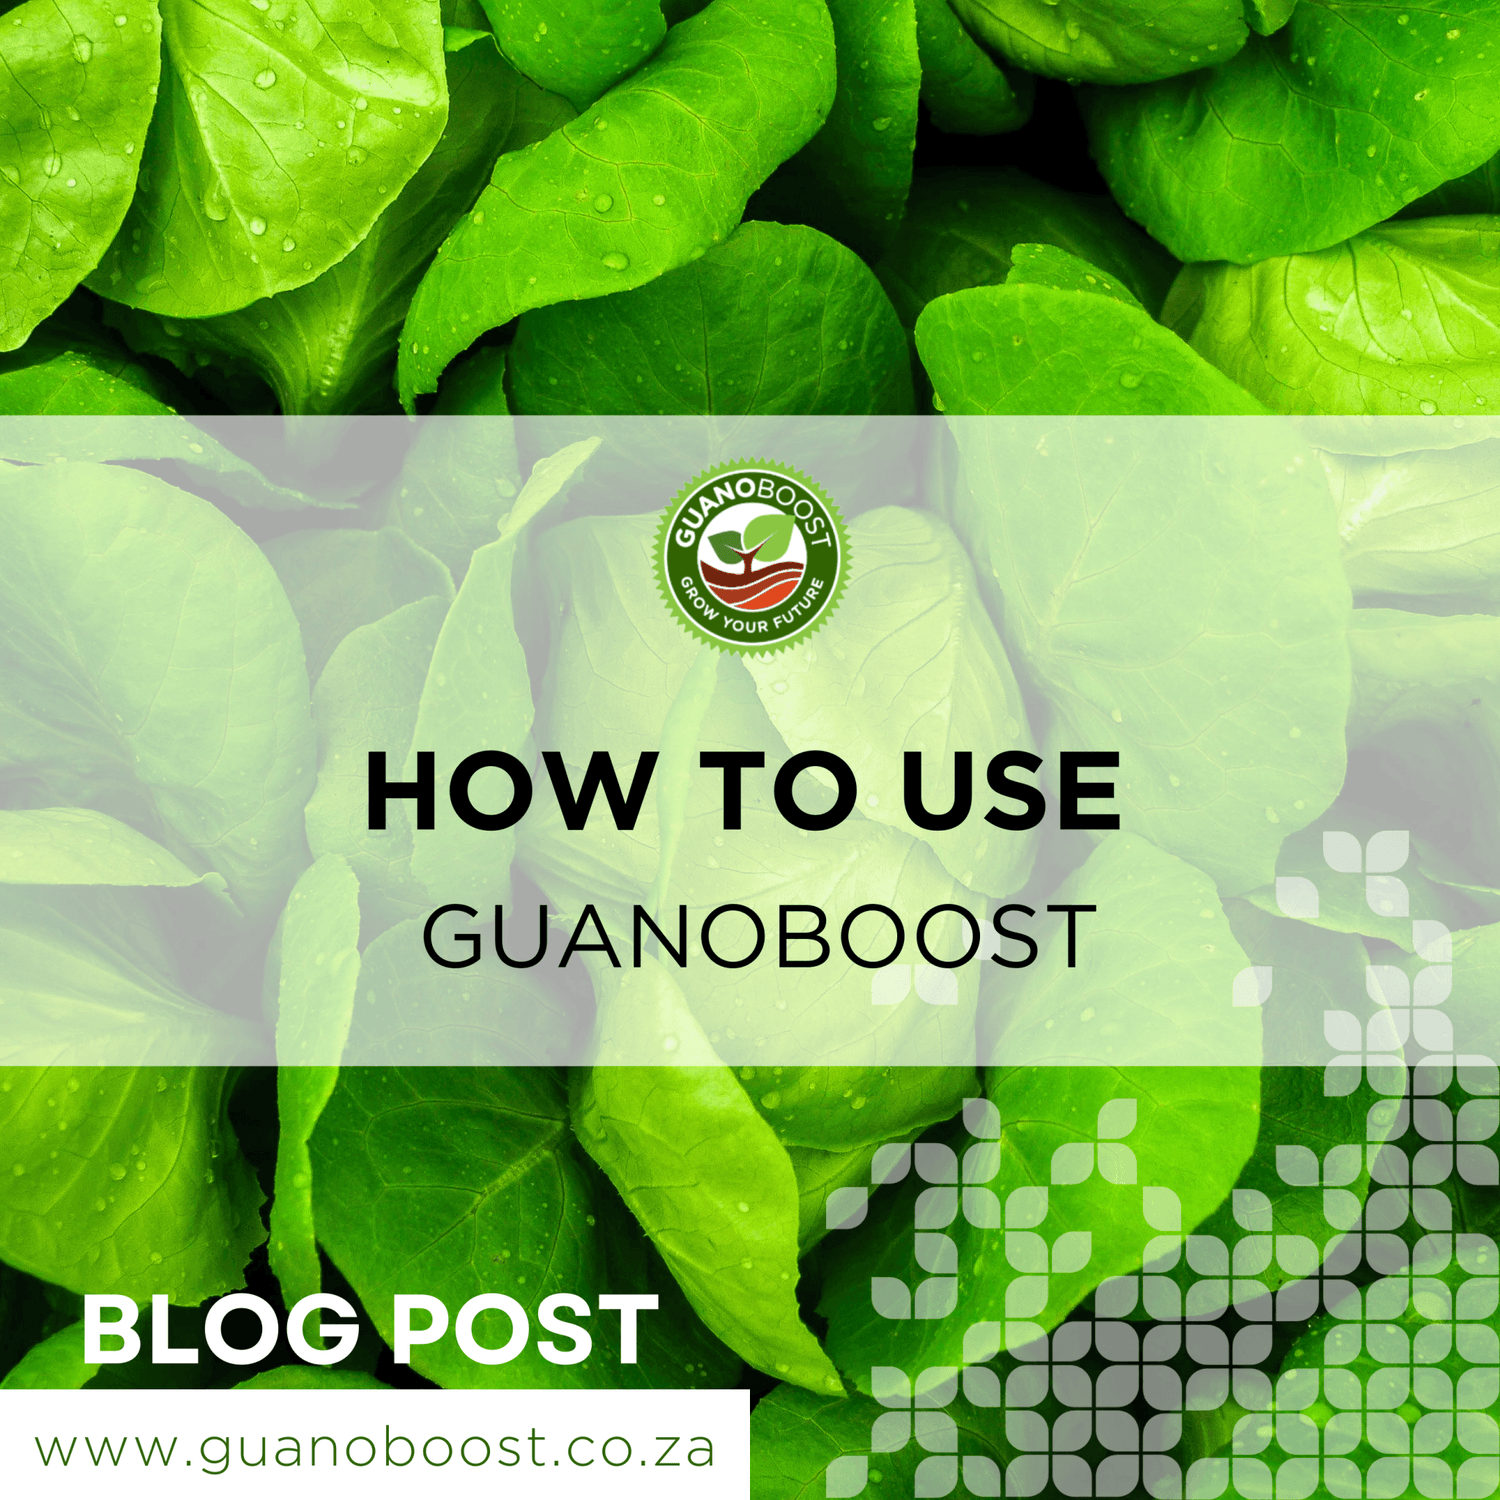 How to use GuanoBoost - GuanoBoost